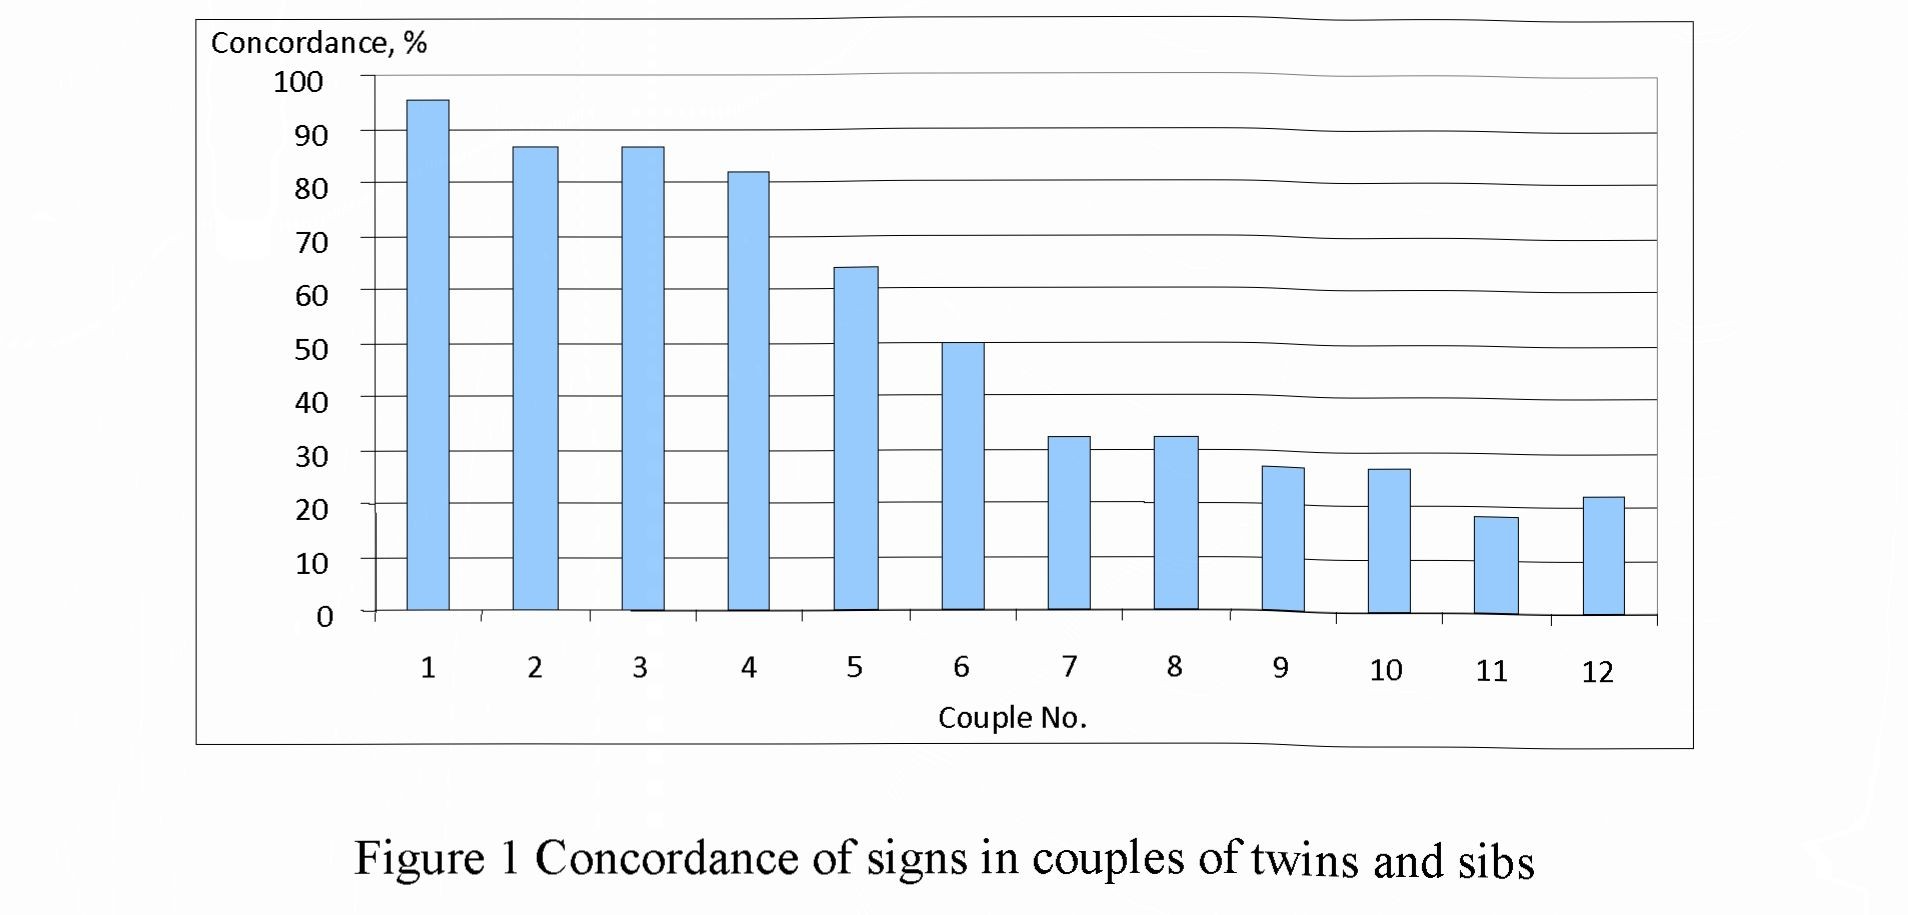 Features of individual differences and simii ari rii s in couples of twins